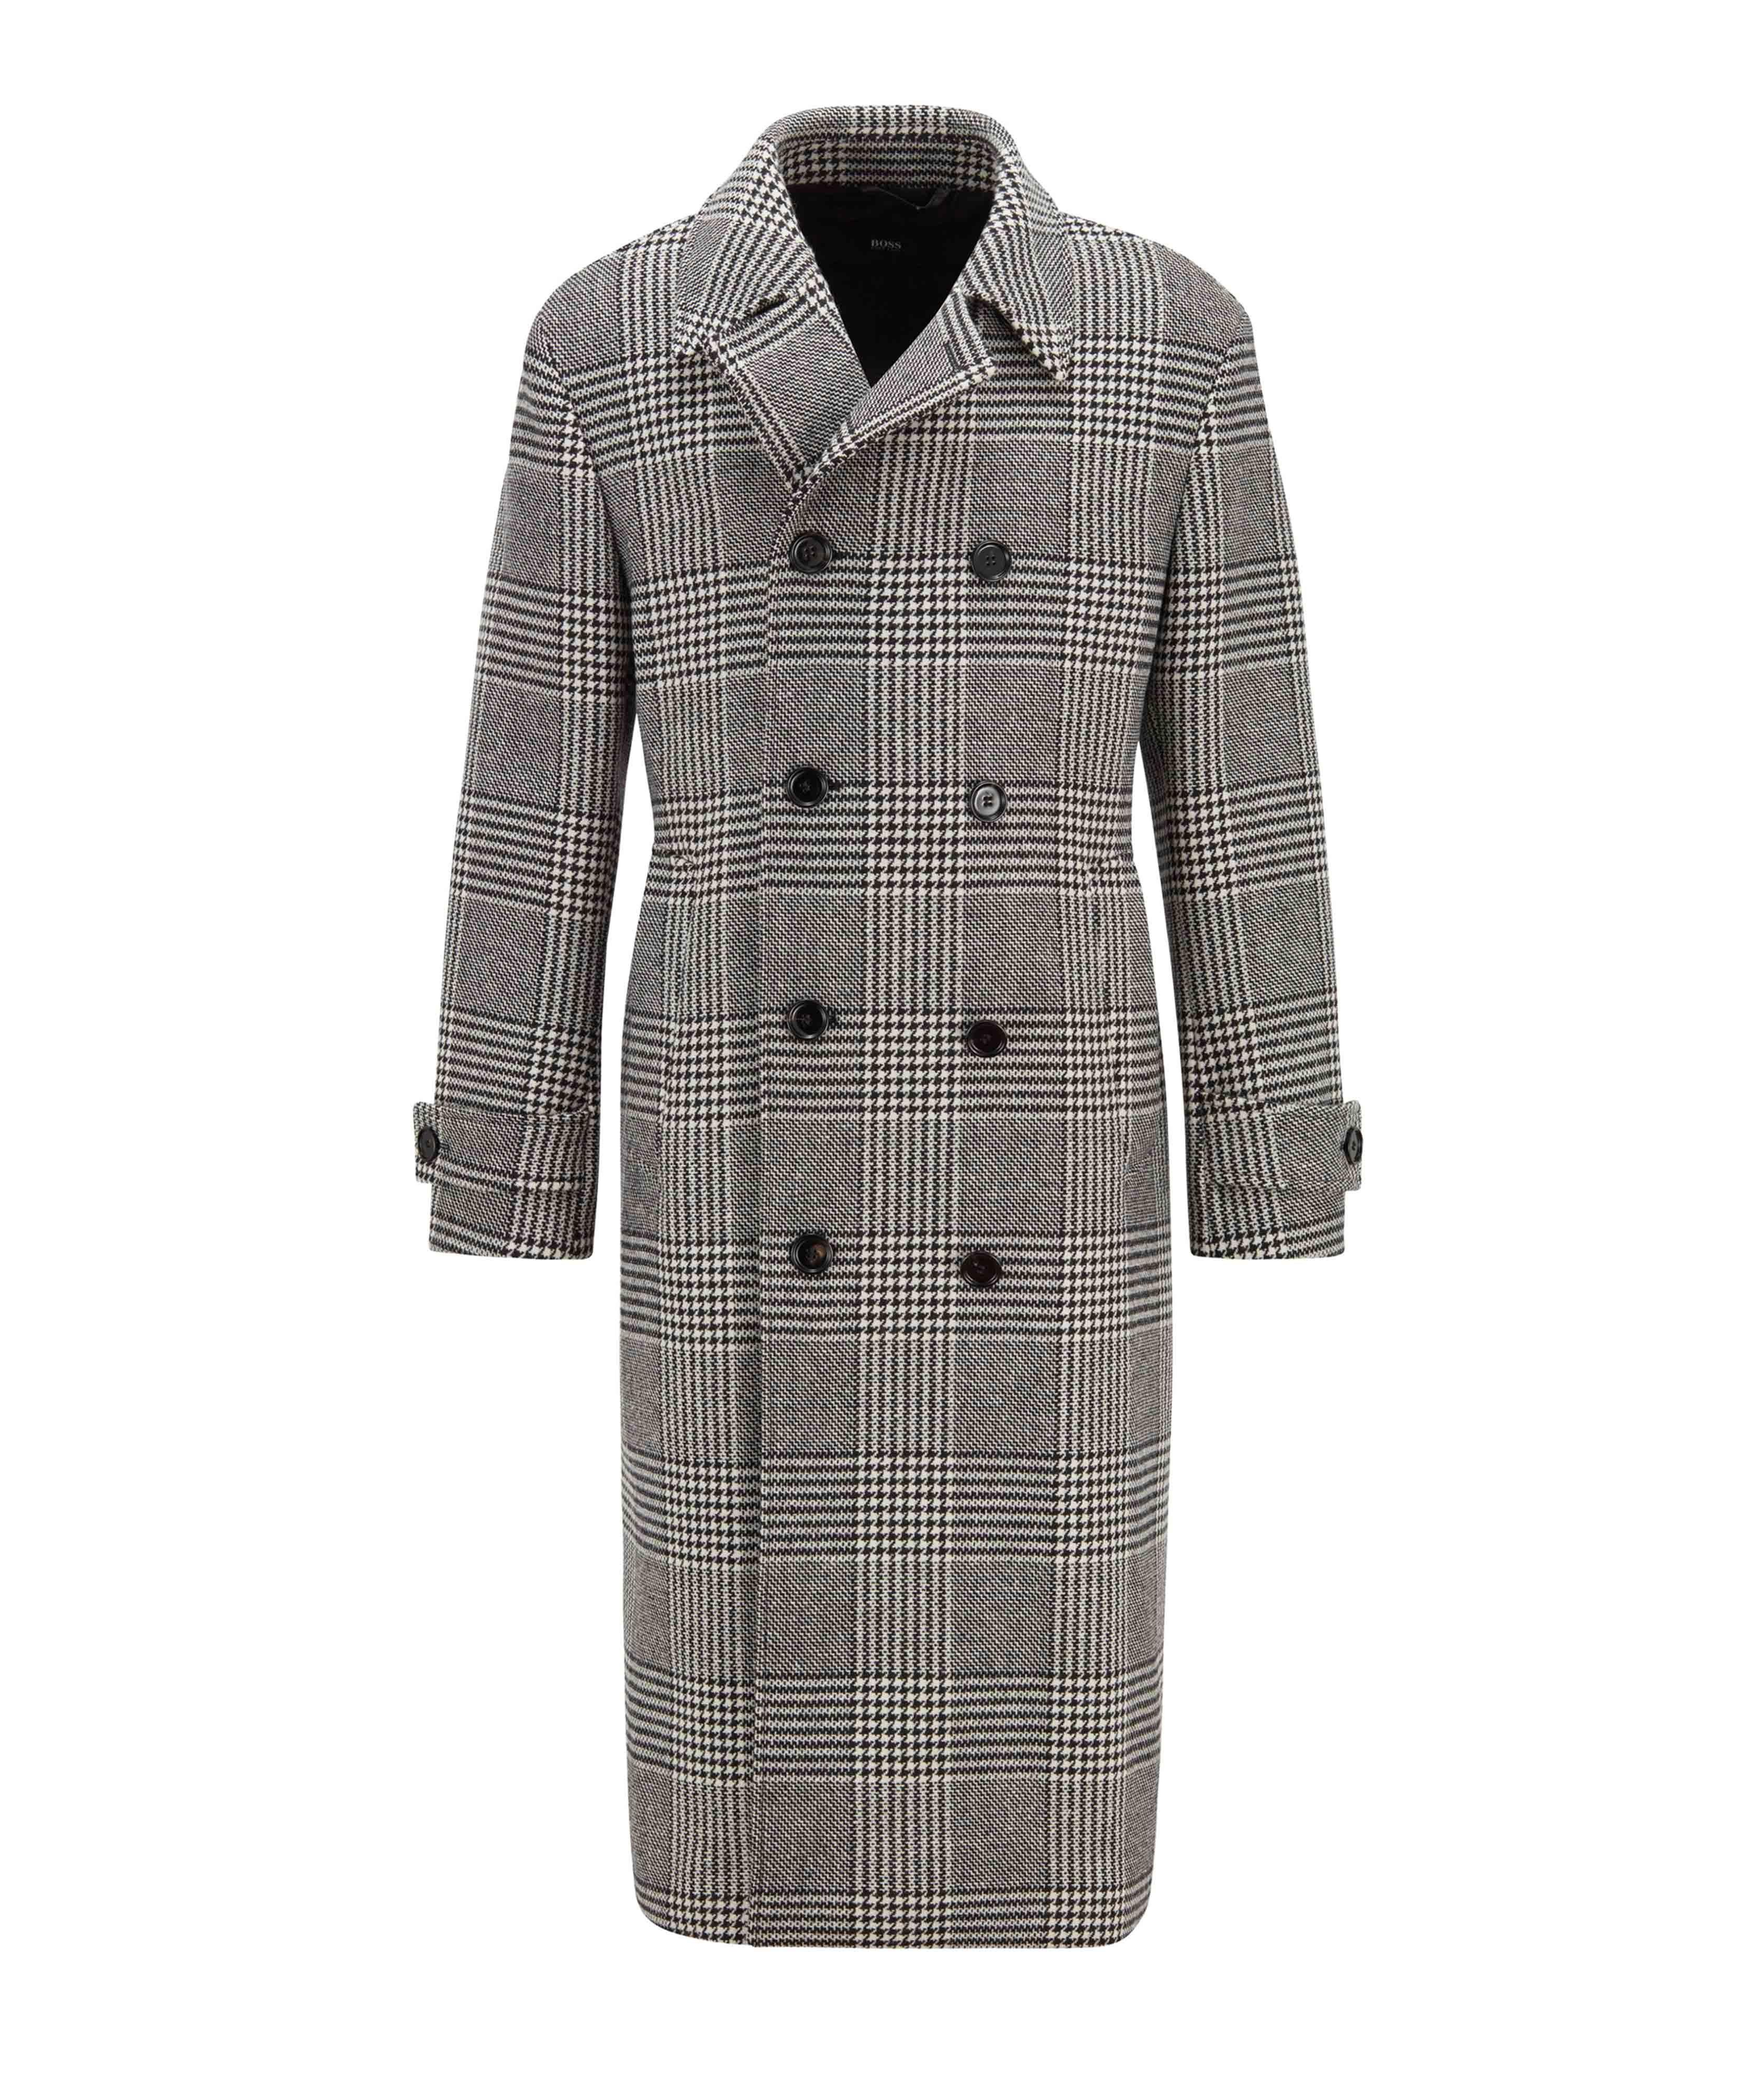 Godeon Double-breasted Wool Coat image 0